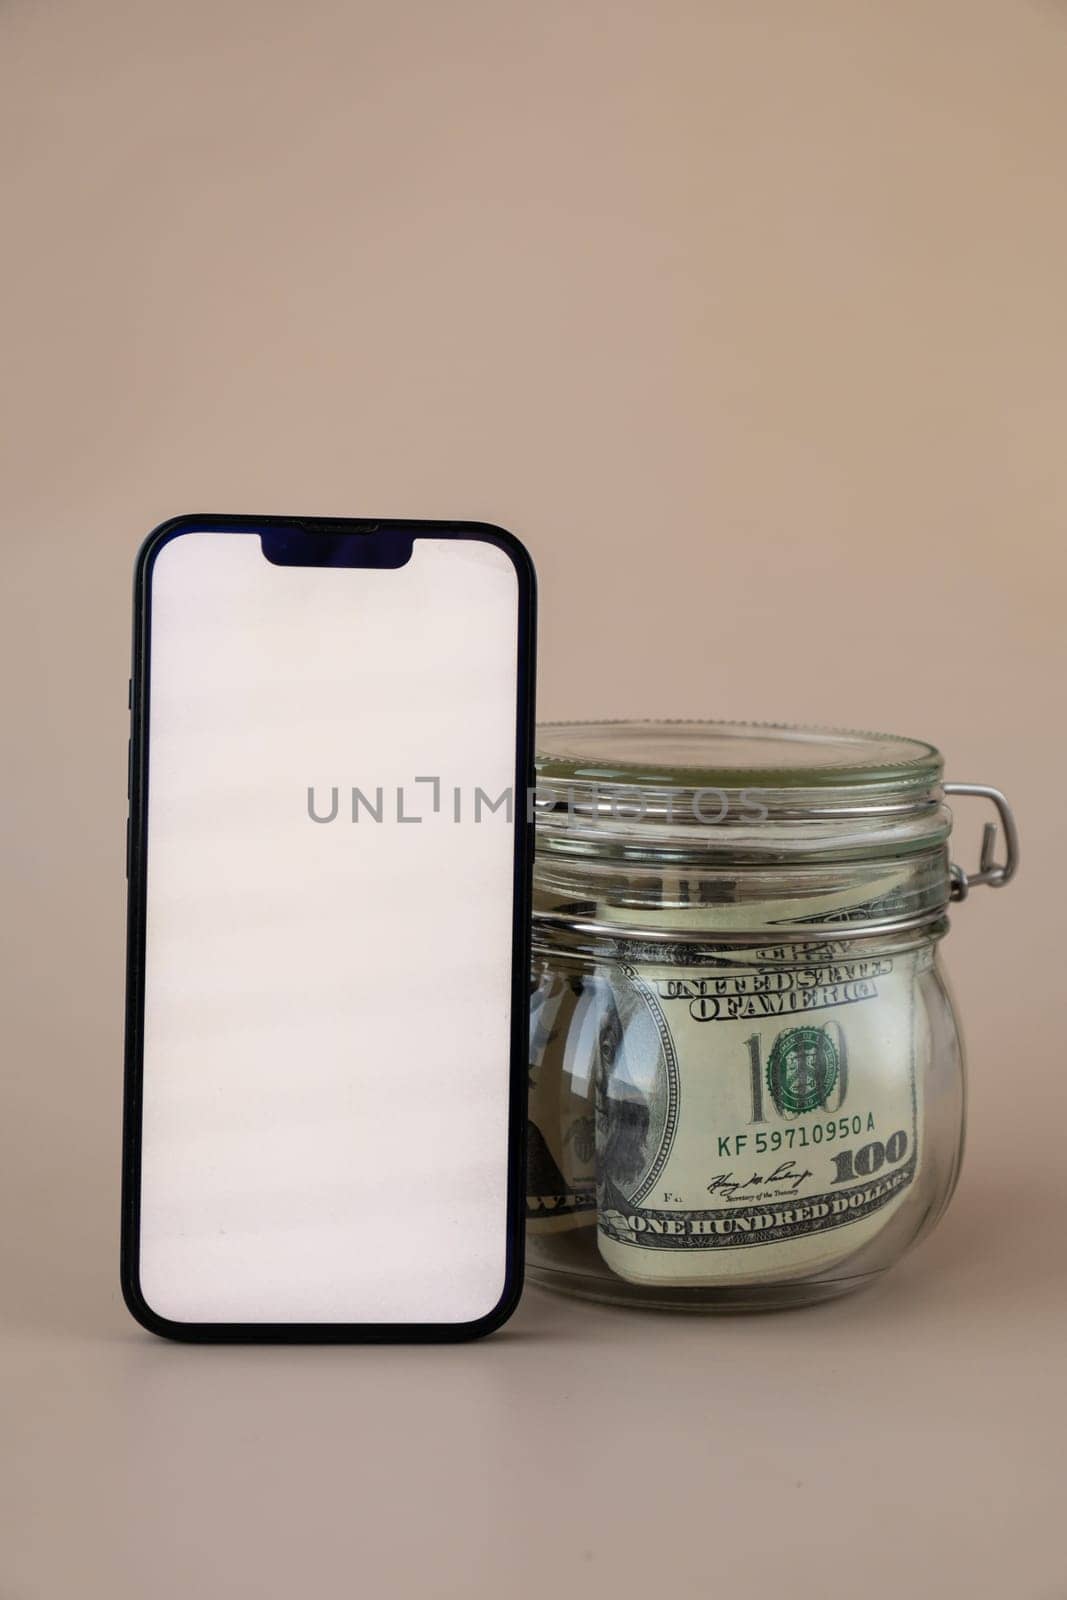 White smartphone screen mock up template in vertical position on beige background. Copy space App website advertising. Jar filled with dollars cash. Concept of Mobile application and technology business savings.